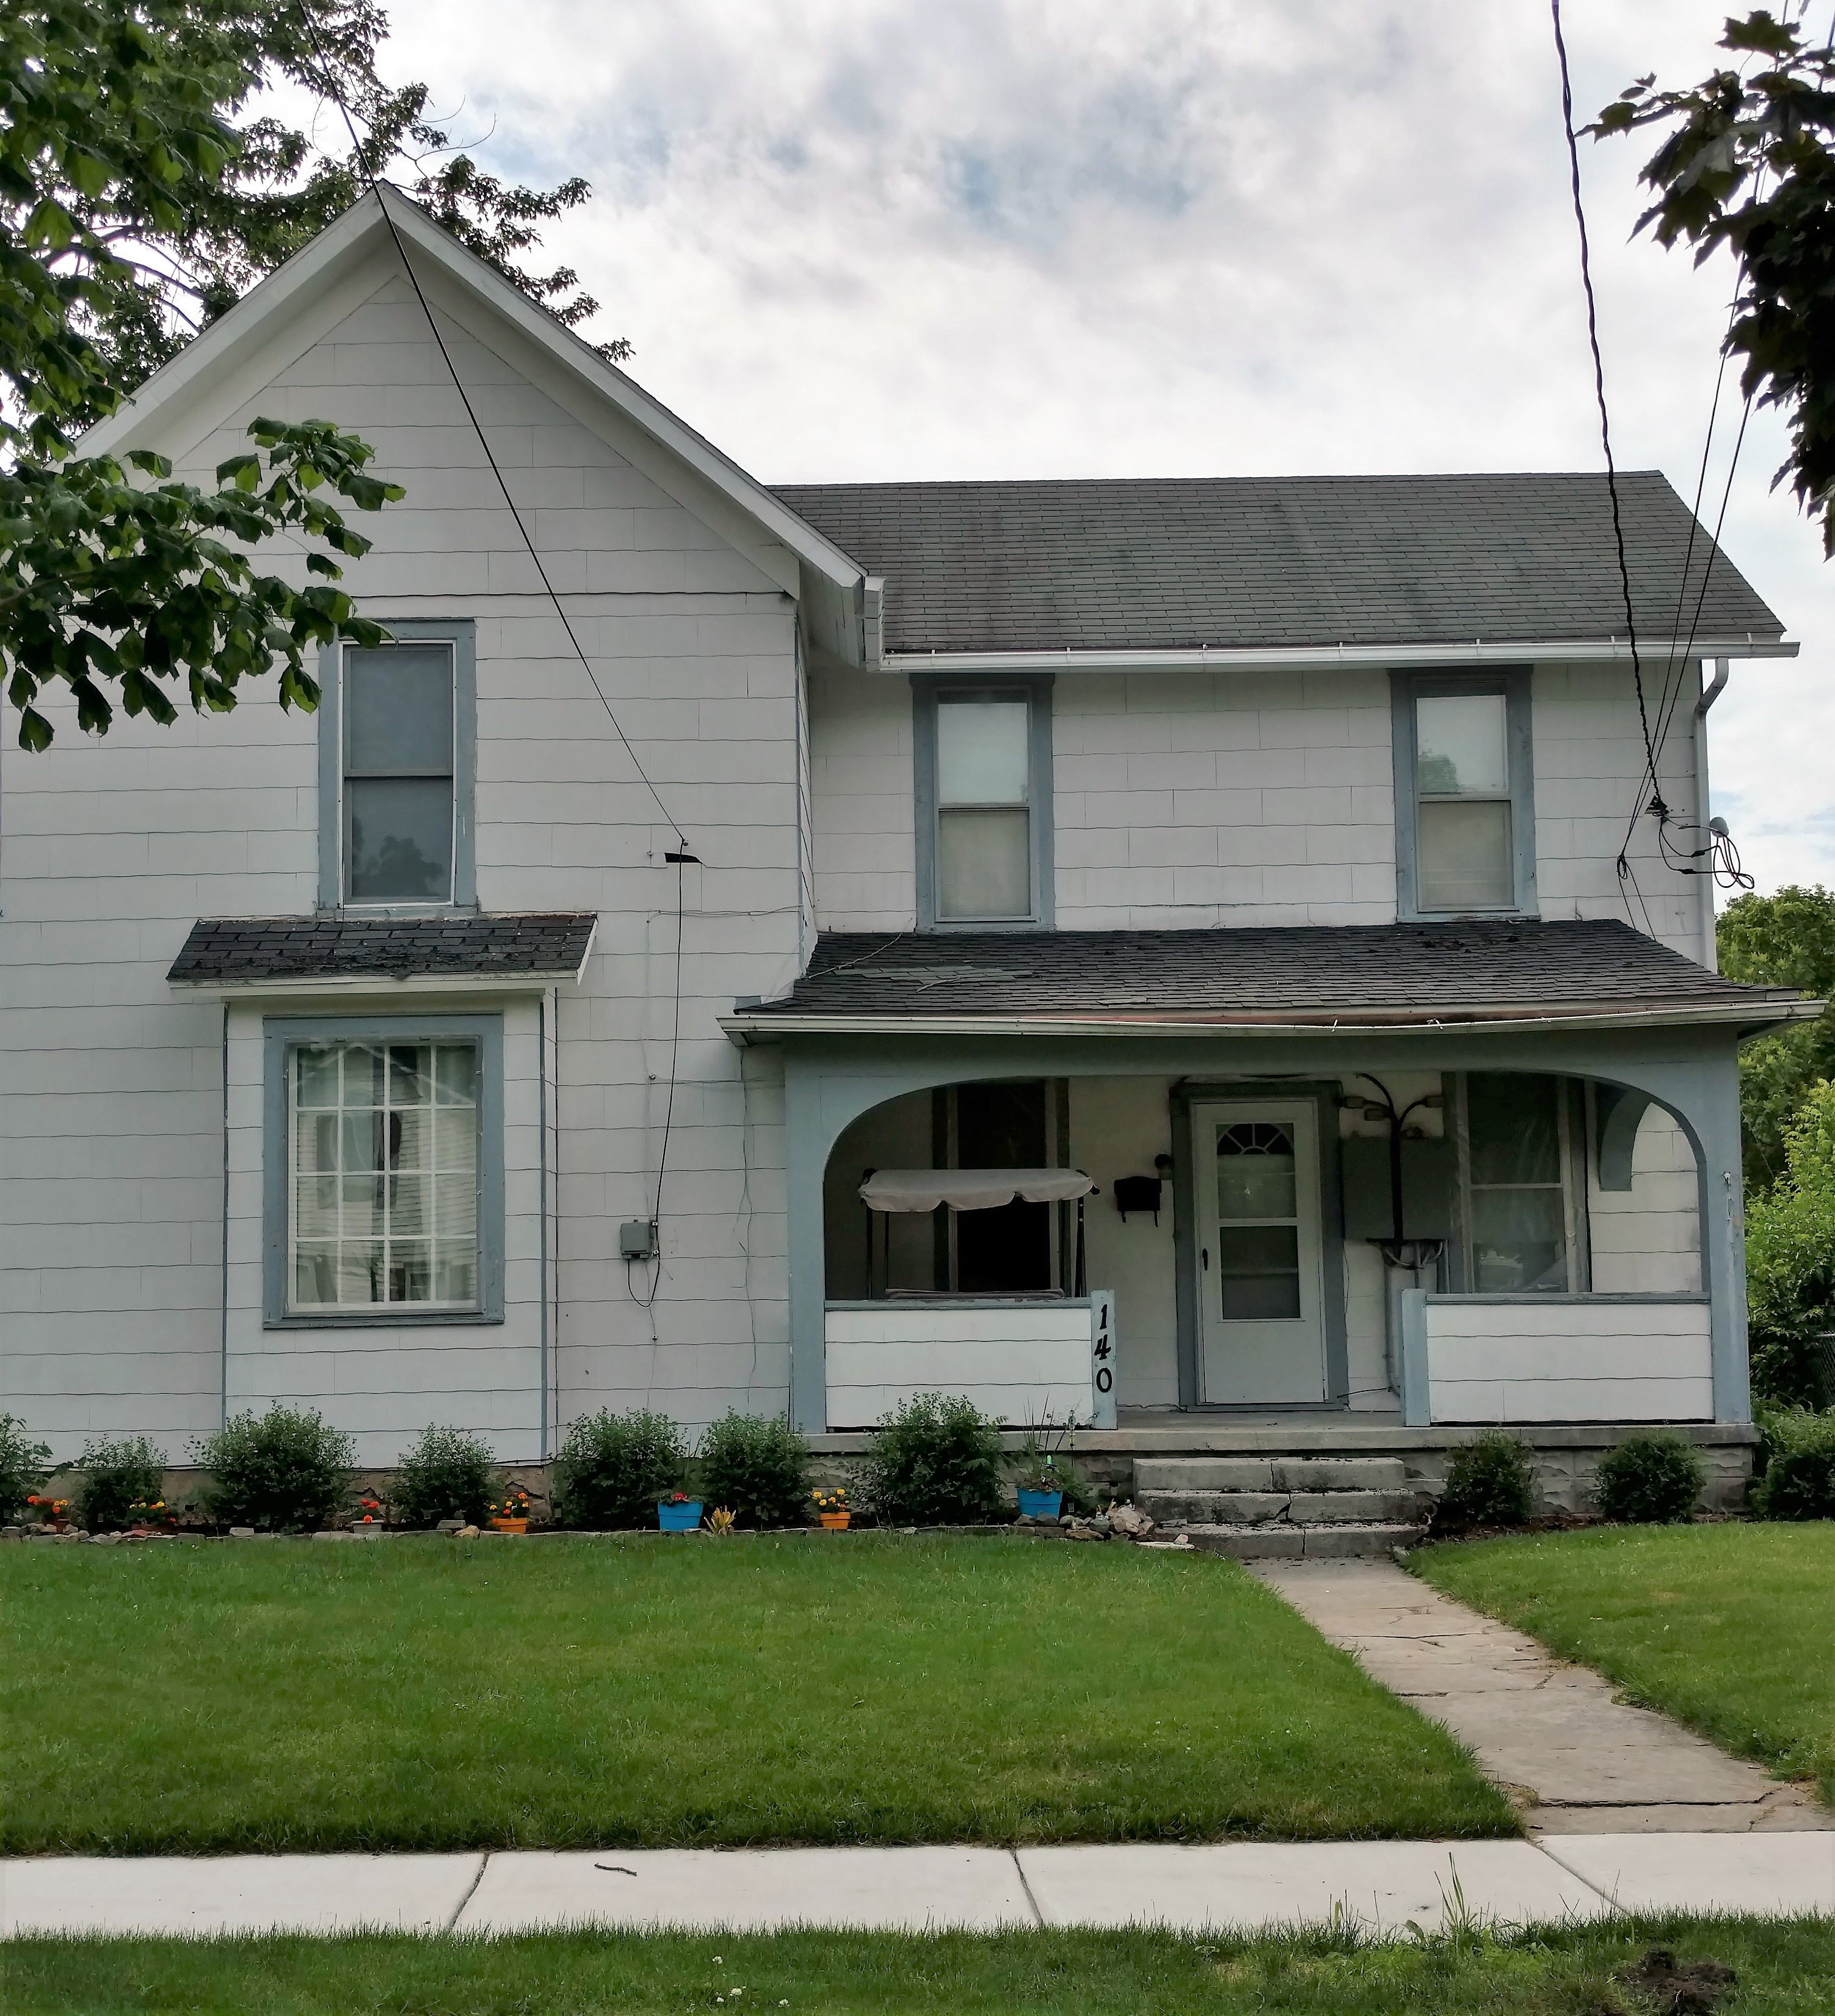 140 1/2 S. Maple St., Bowling Green, OH  43402